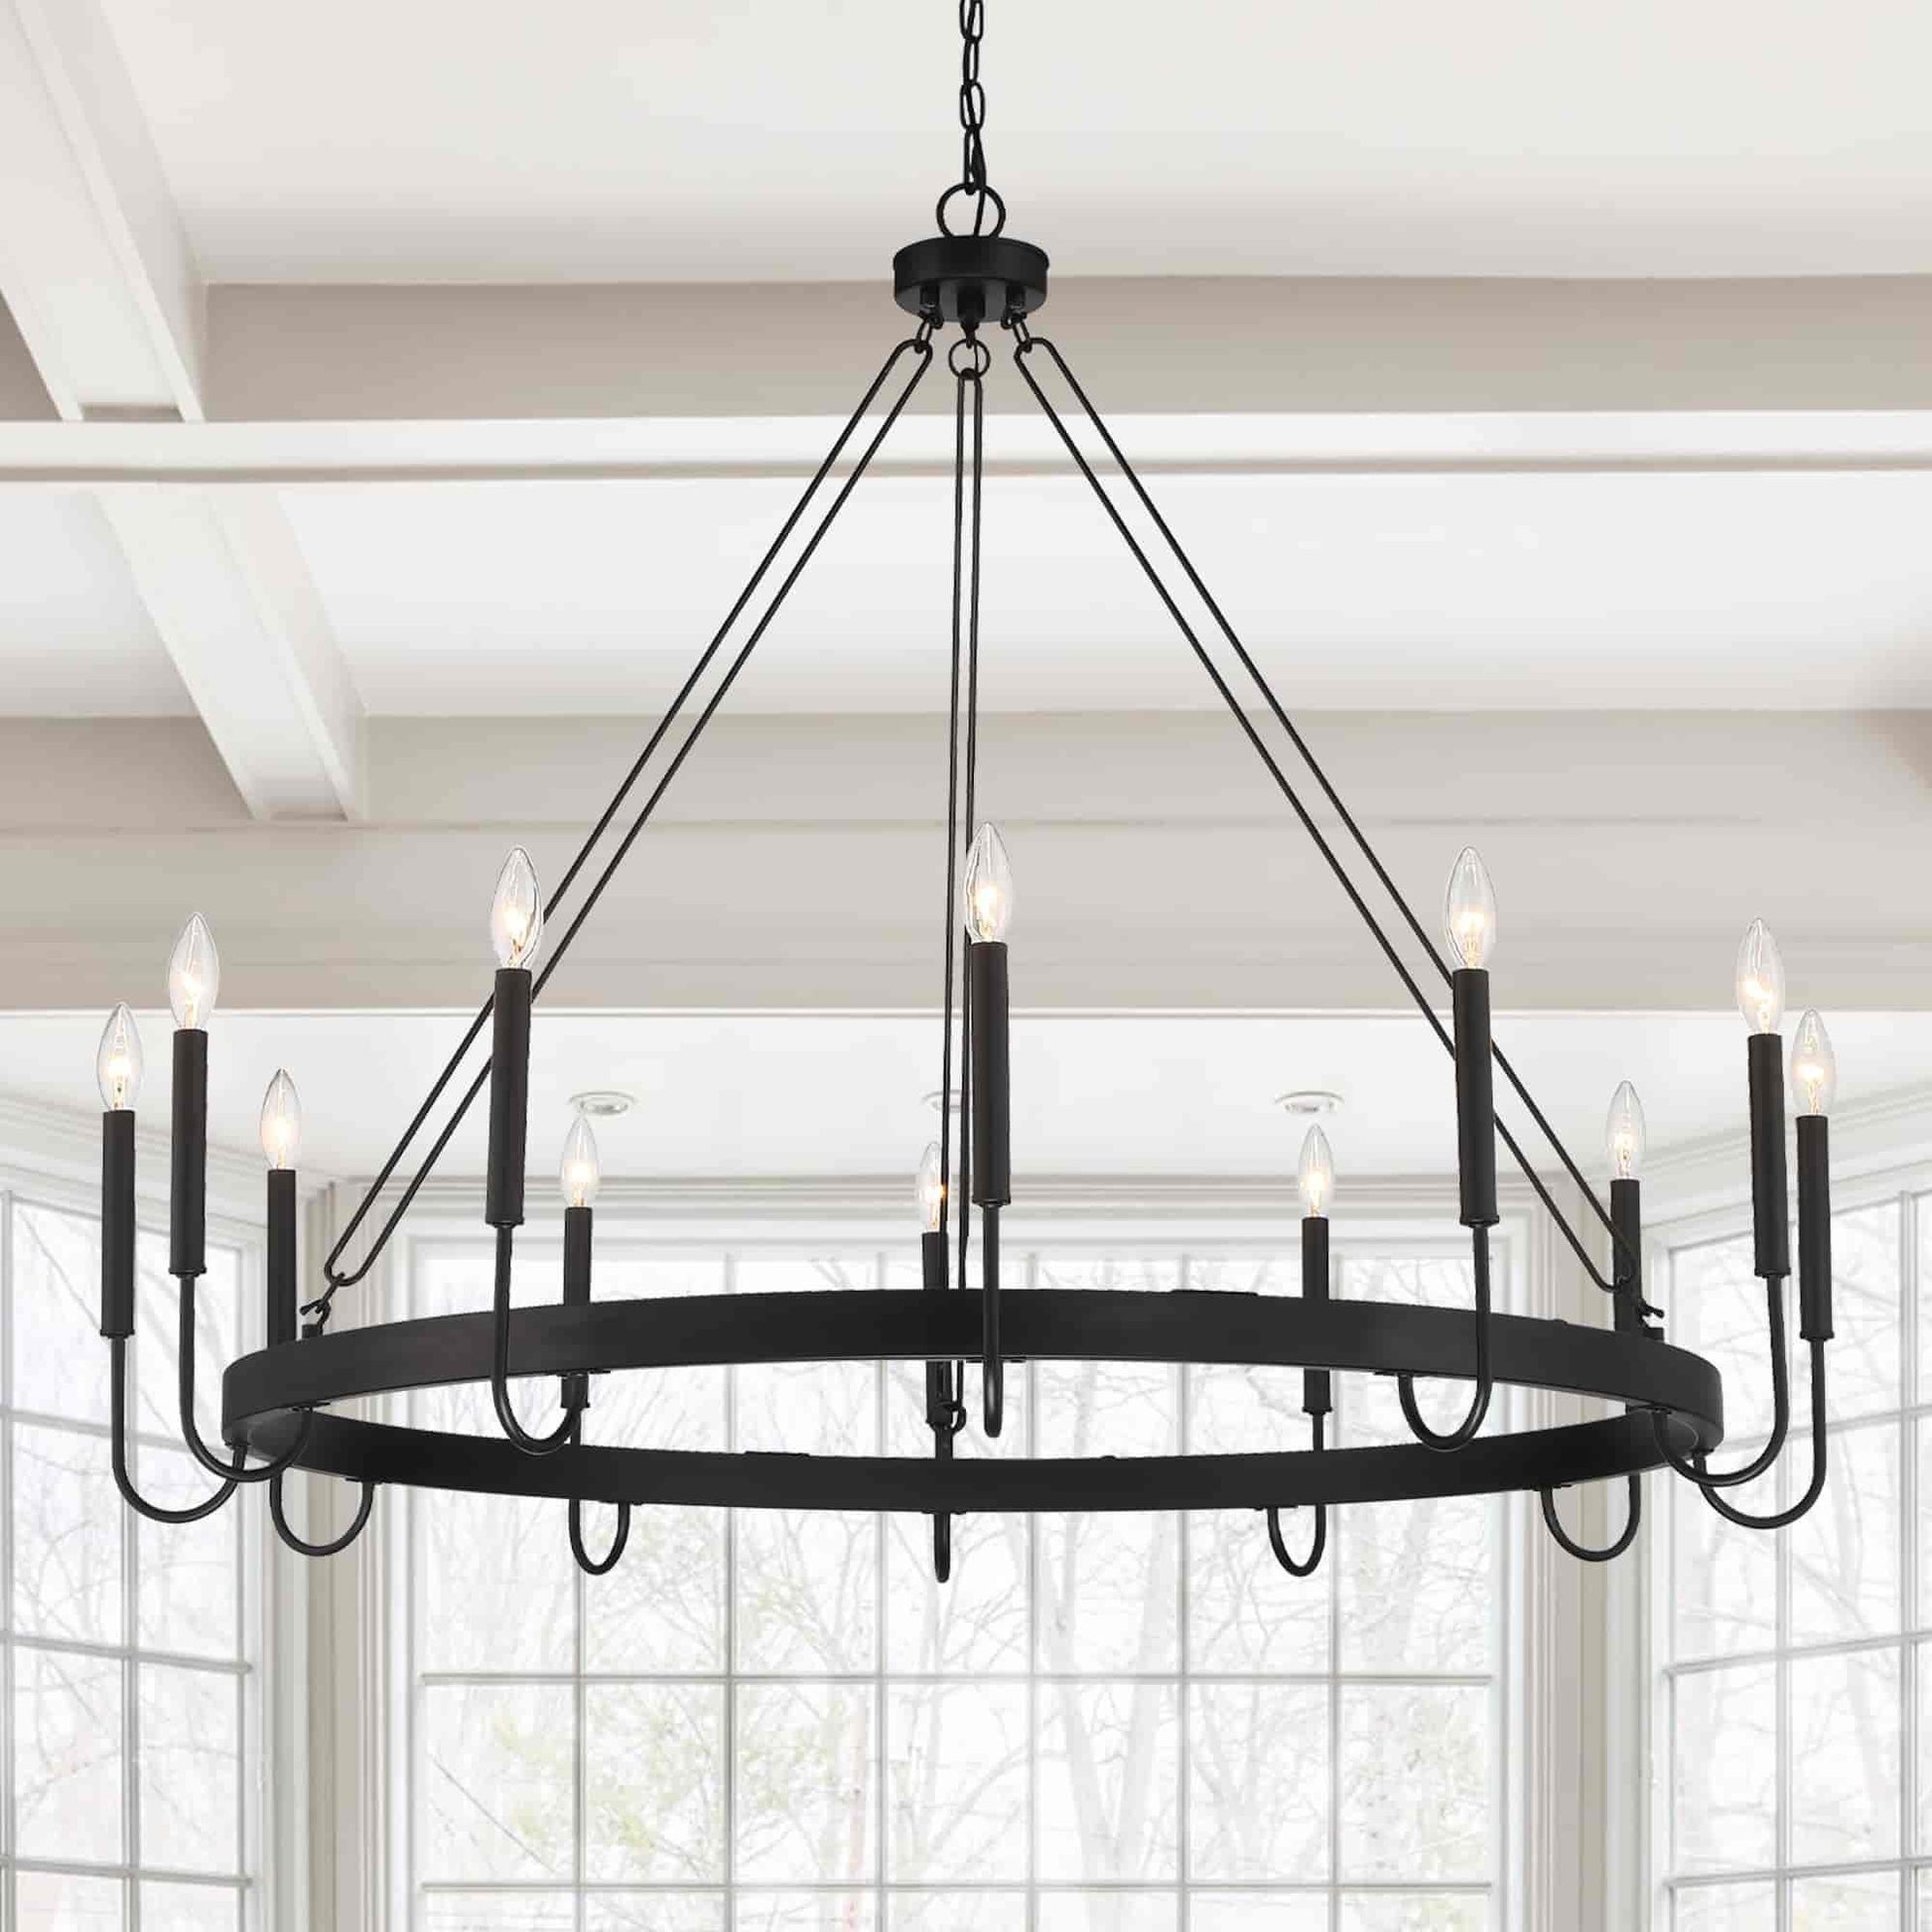 12 light candle style wagon wheel chain chandelier (5) by ACROMA